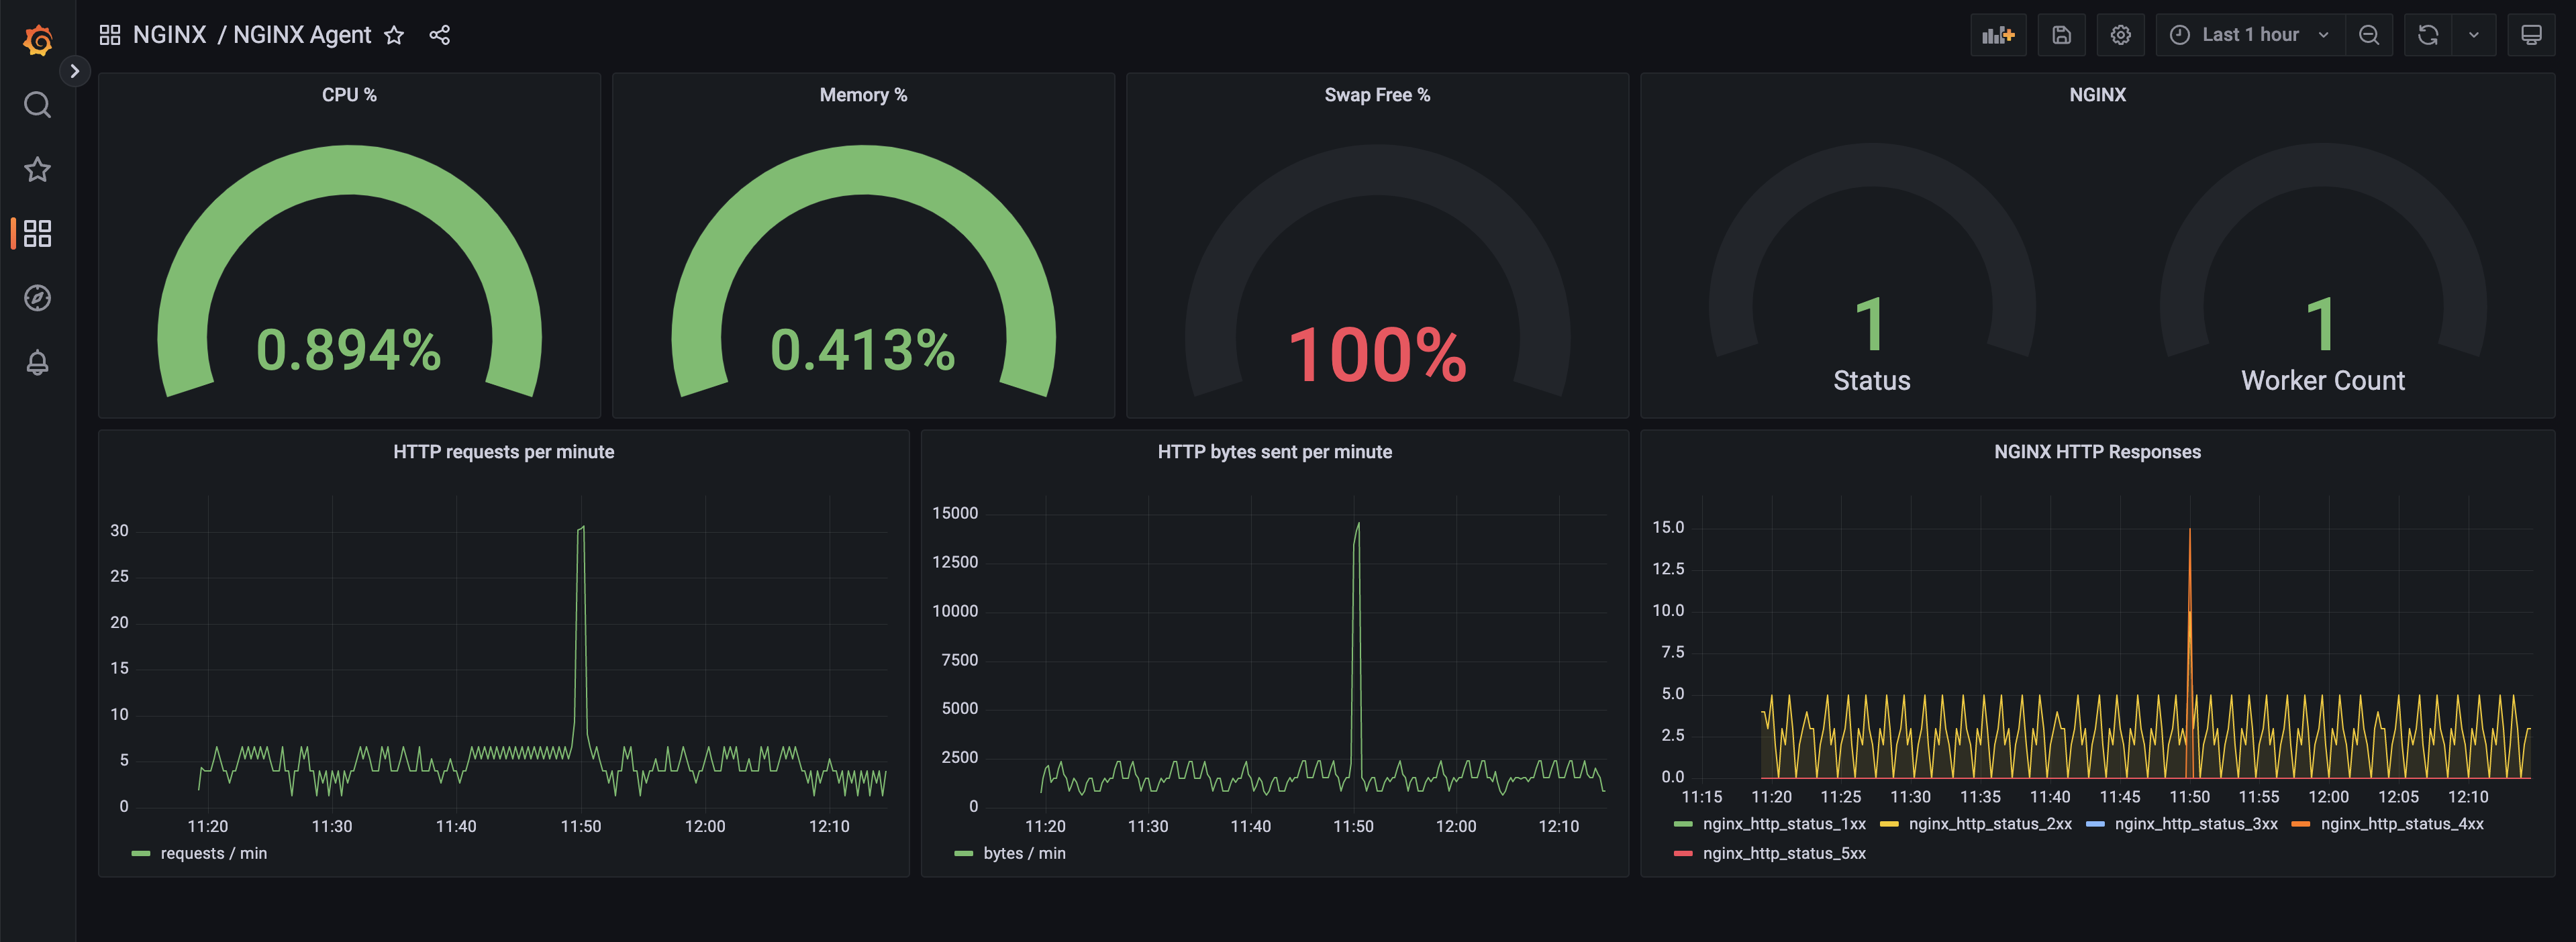 Grafana dashboard showing metrics reported by NGINX Agent